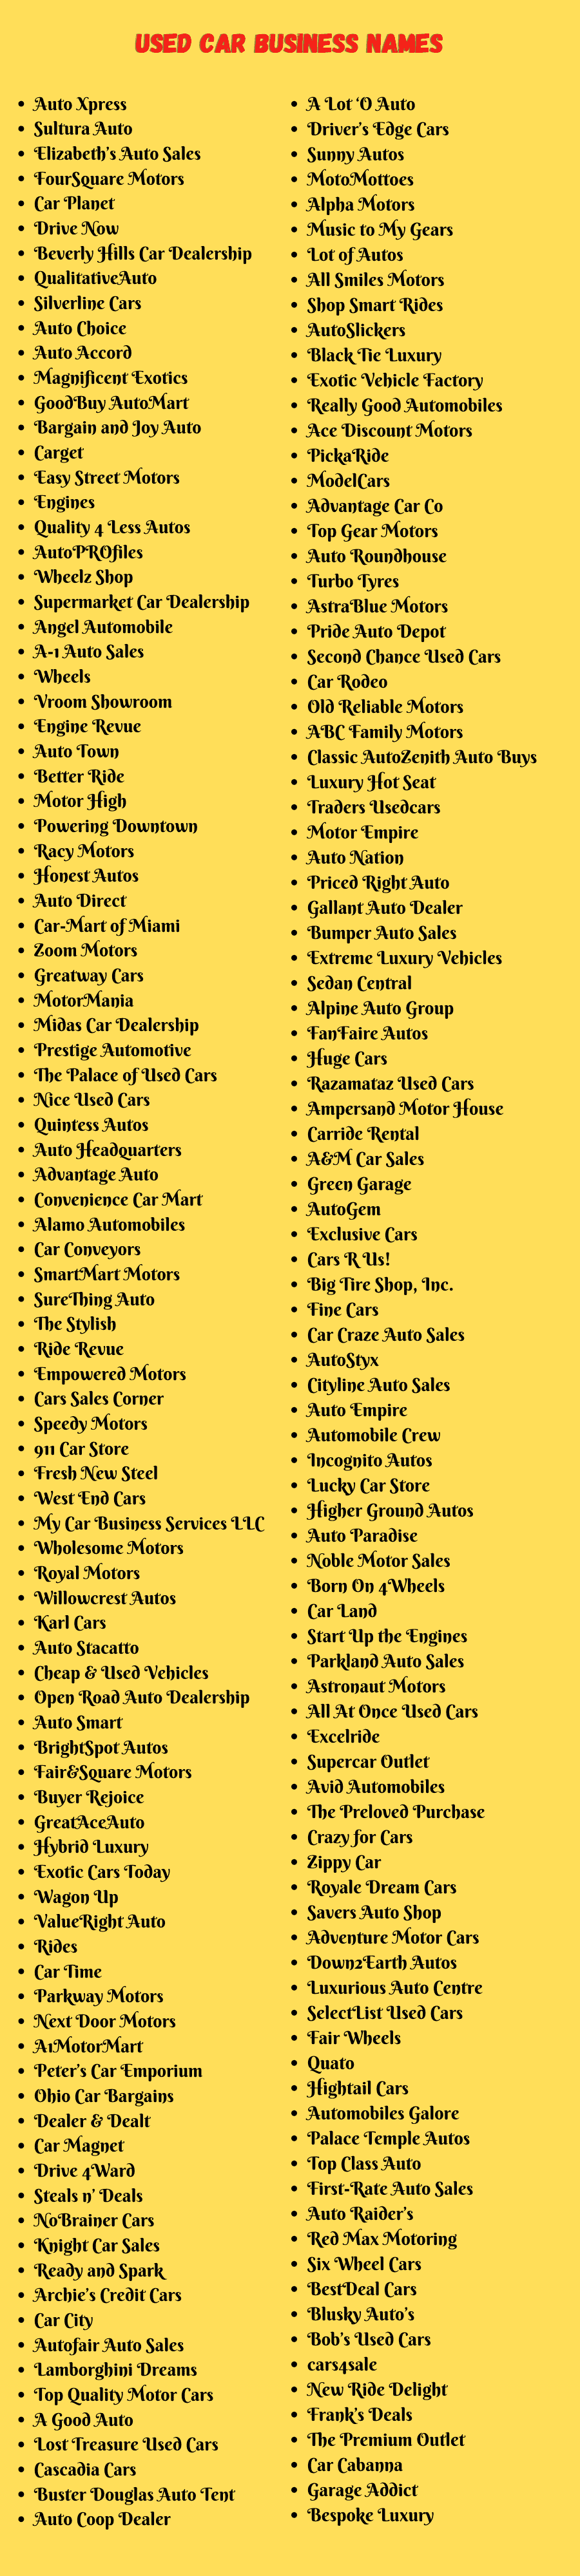 Used Car Business Names